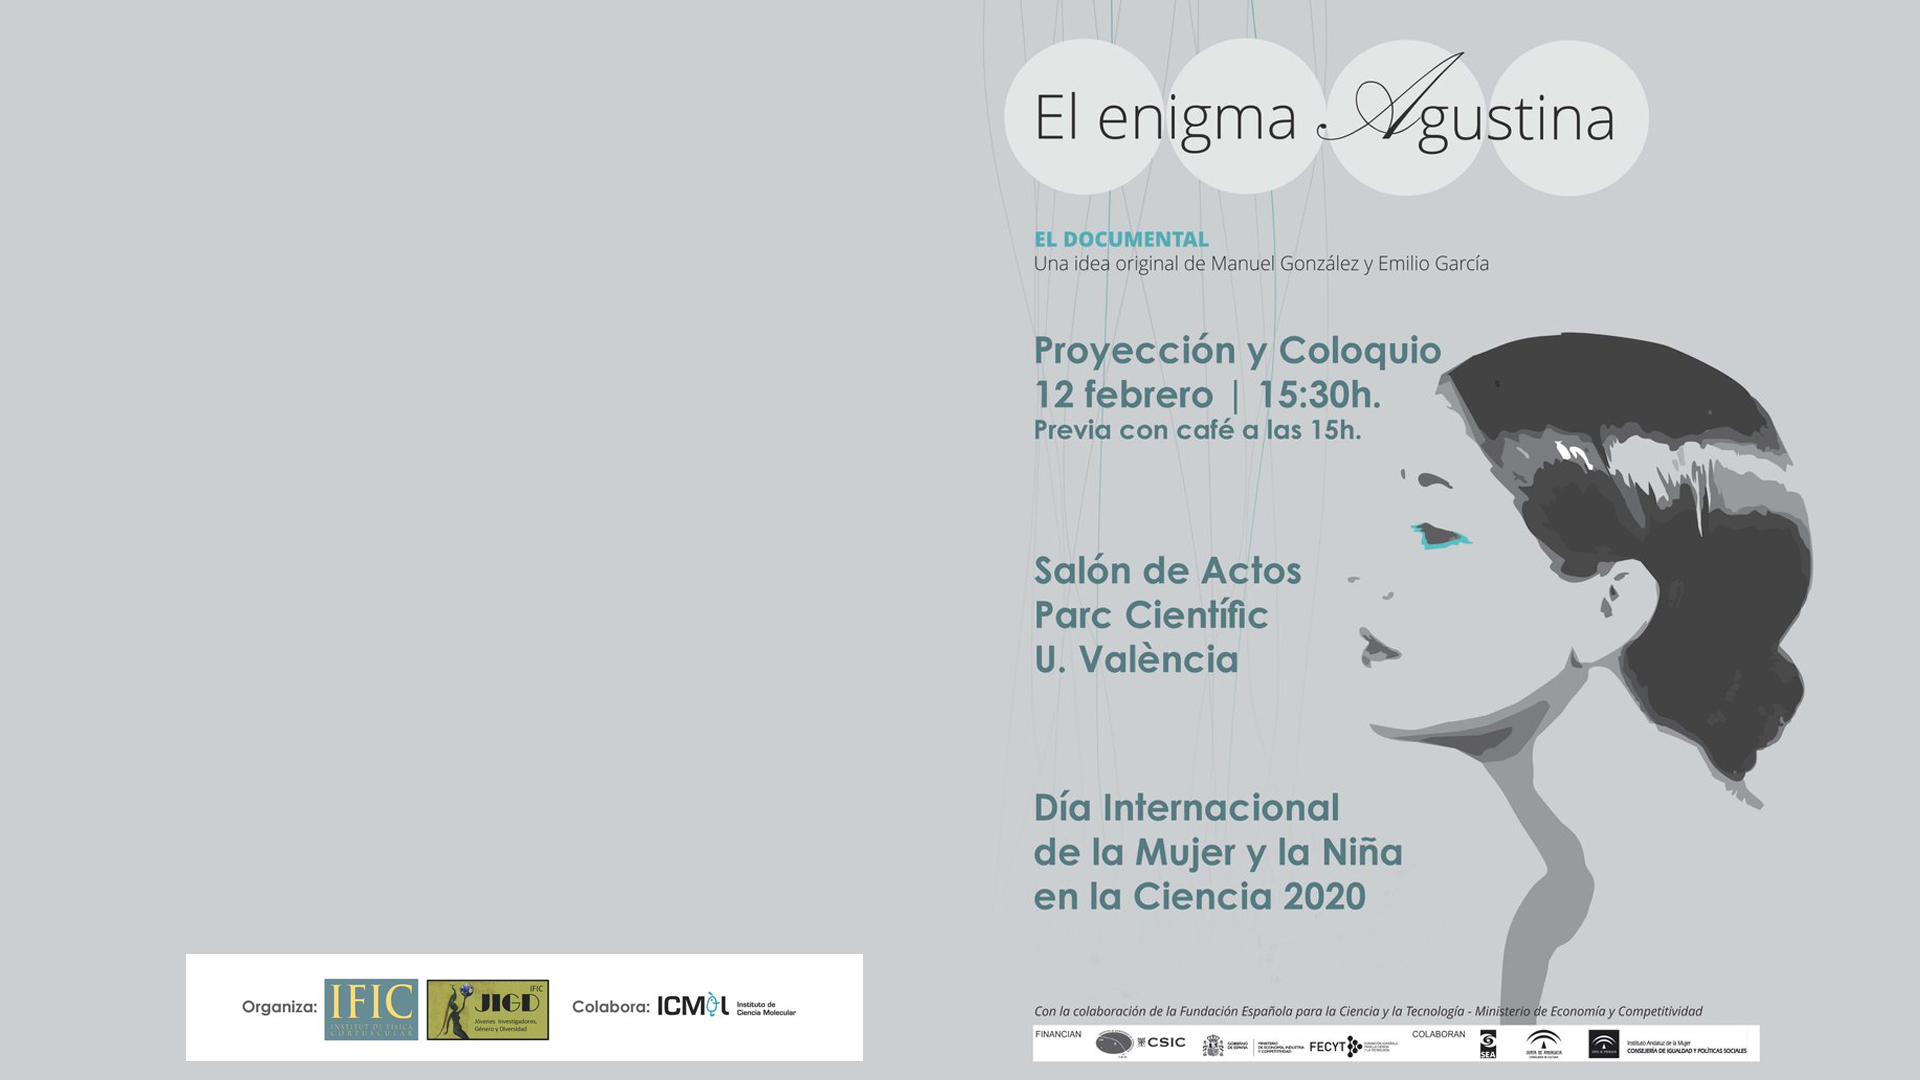 Screening and discussion of 'El enigma Agustina'